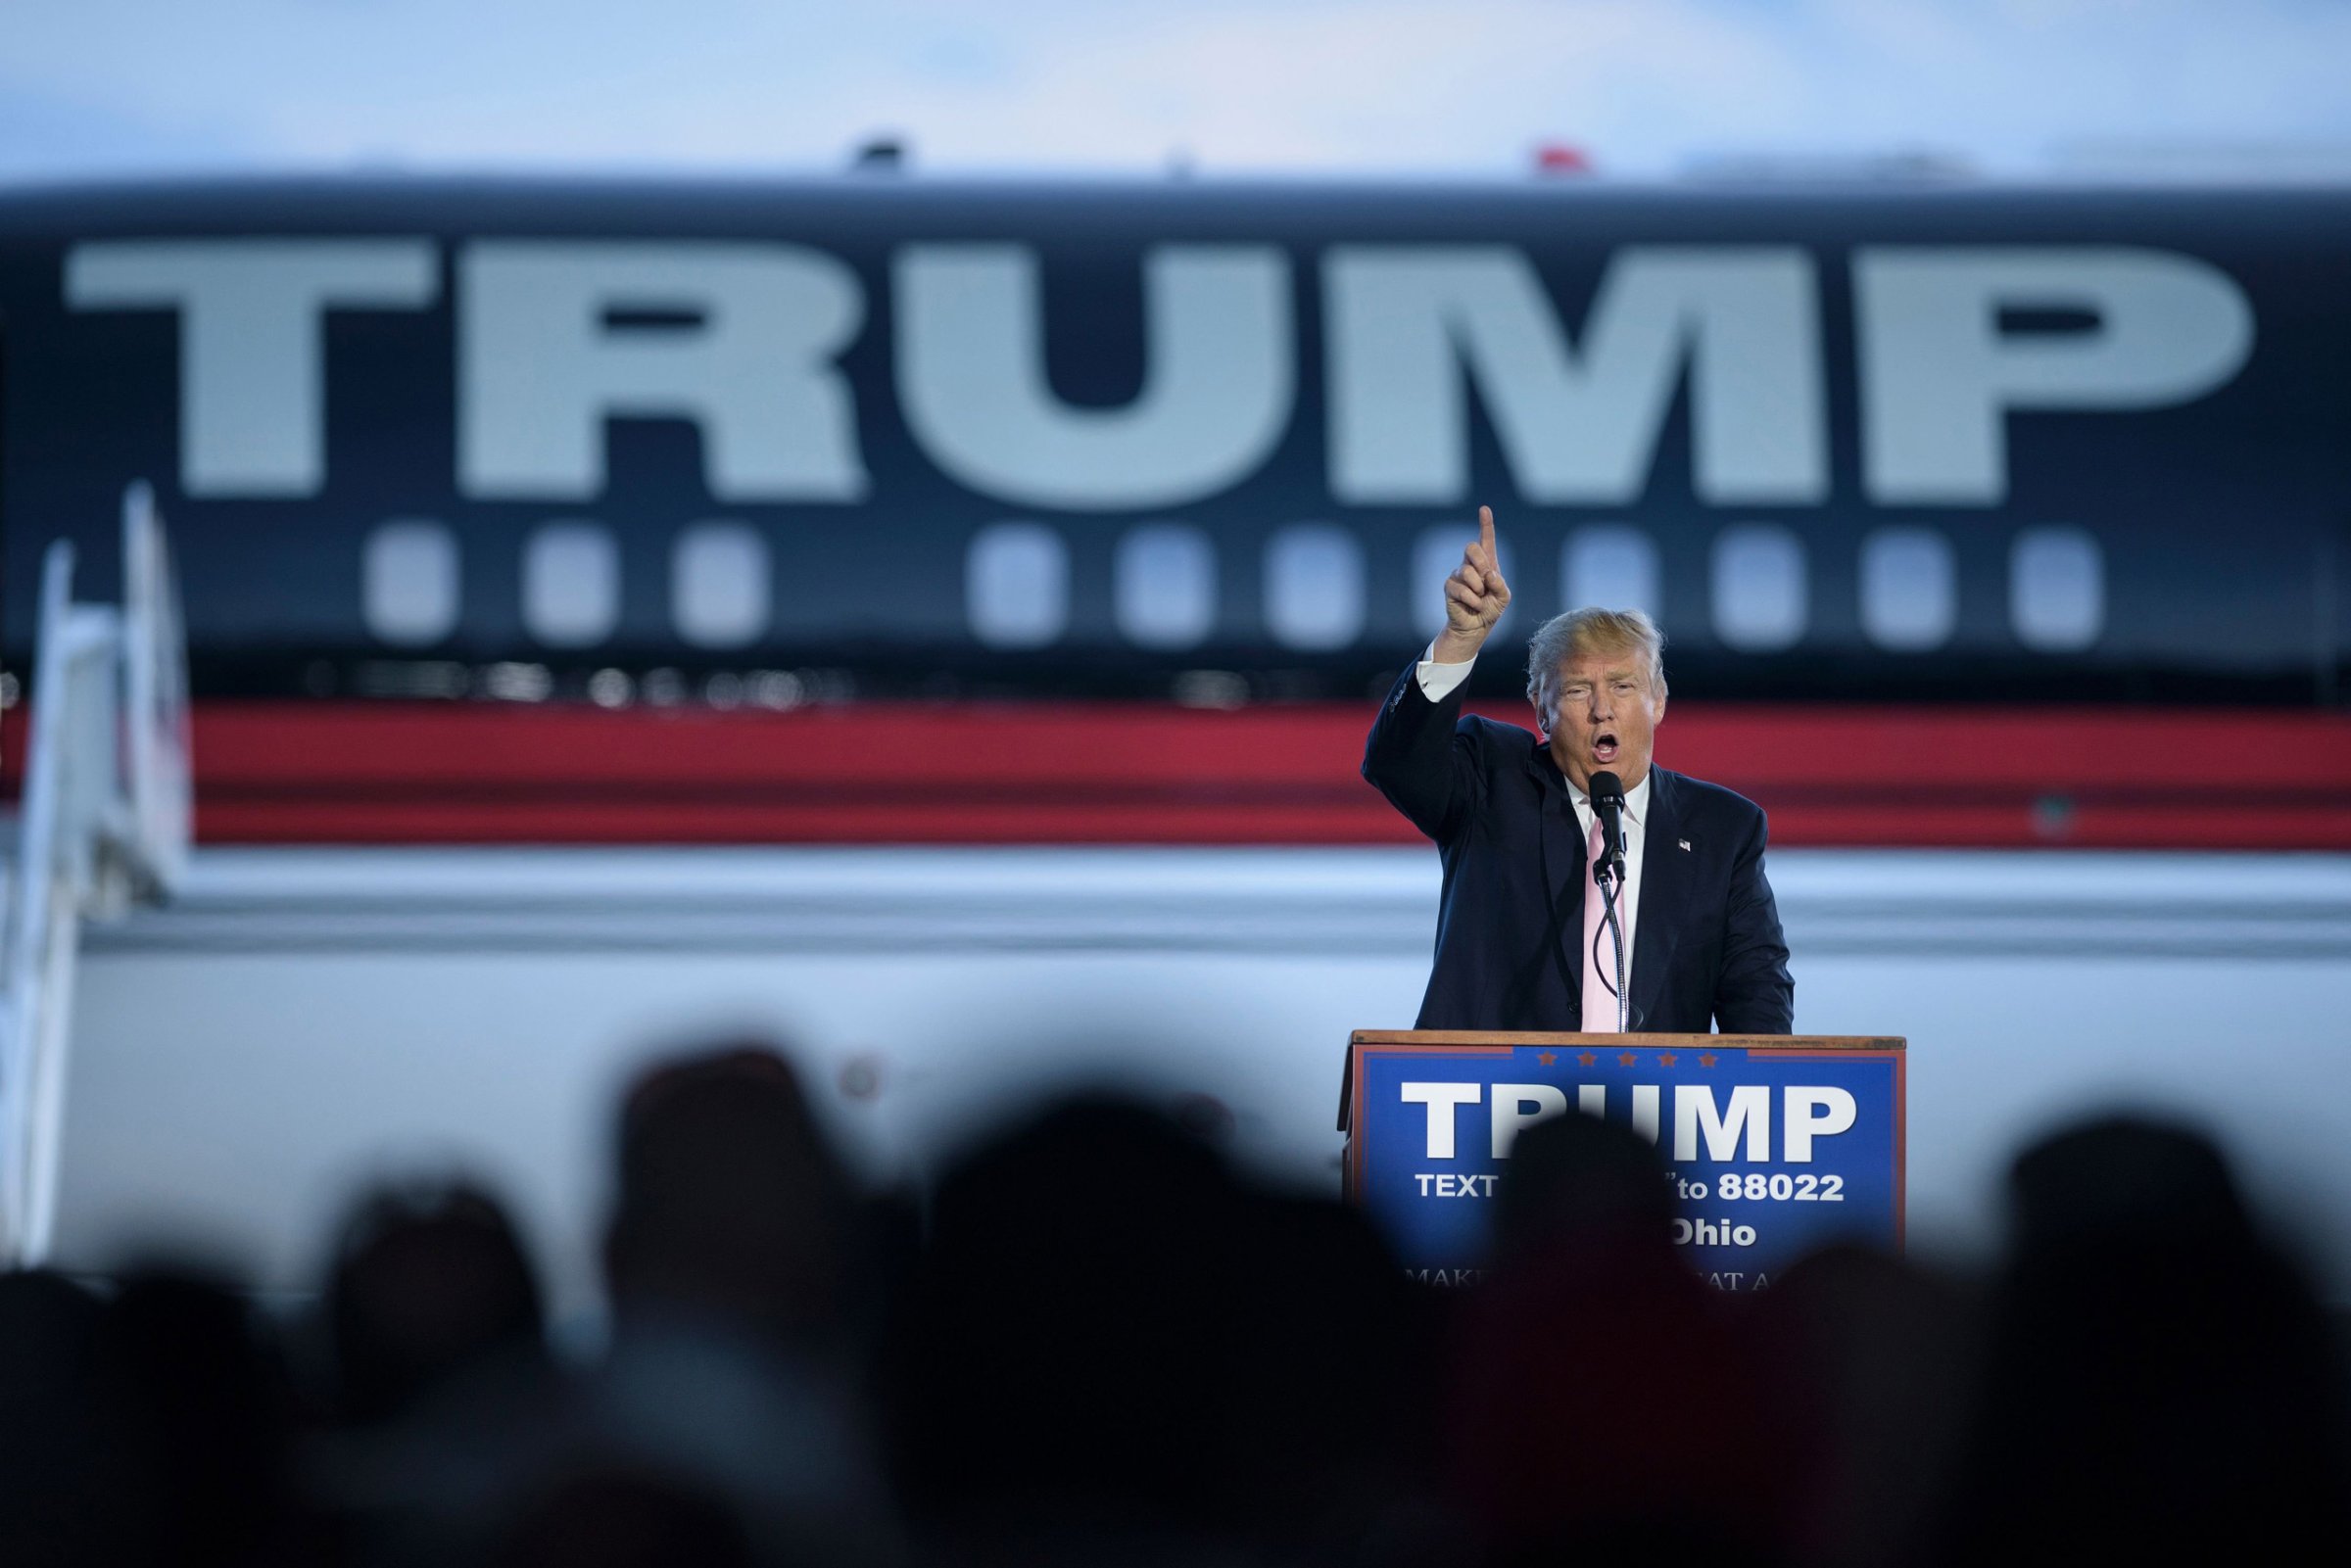 US presidential hopeful Donald Trump speaks during a rally March 14, 2016 in Vienna Center, Ohio. The six remaining White House hopefuls made a frantic push for votes March 14, 2016 on the eve of make-or-break nominating contests, with Donald Trump's Republican rivals desperate to bar his path after a weekend of violence on the campaign trail. / AFP PHOTO / Brendan SmialowskiBRENDAN SMIALOWSKI/AFP/Getty Images